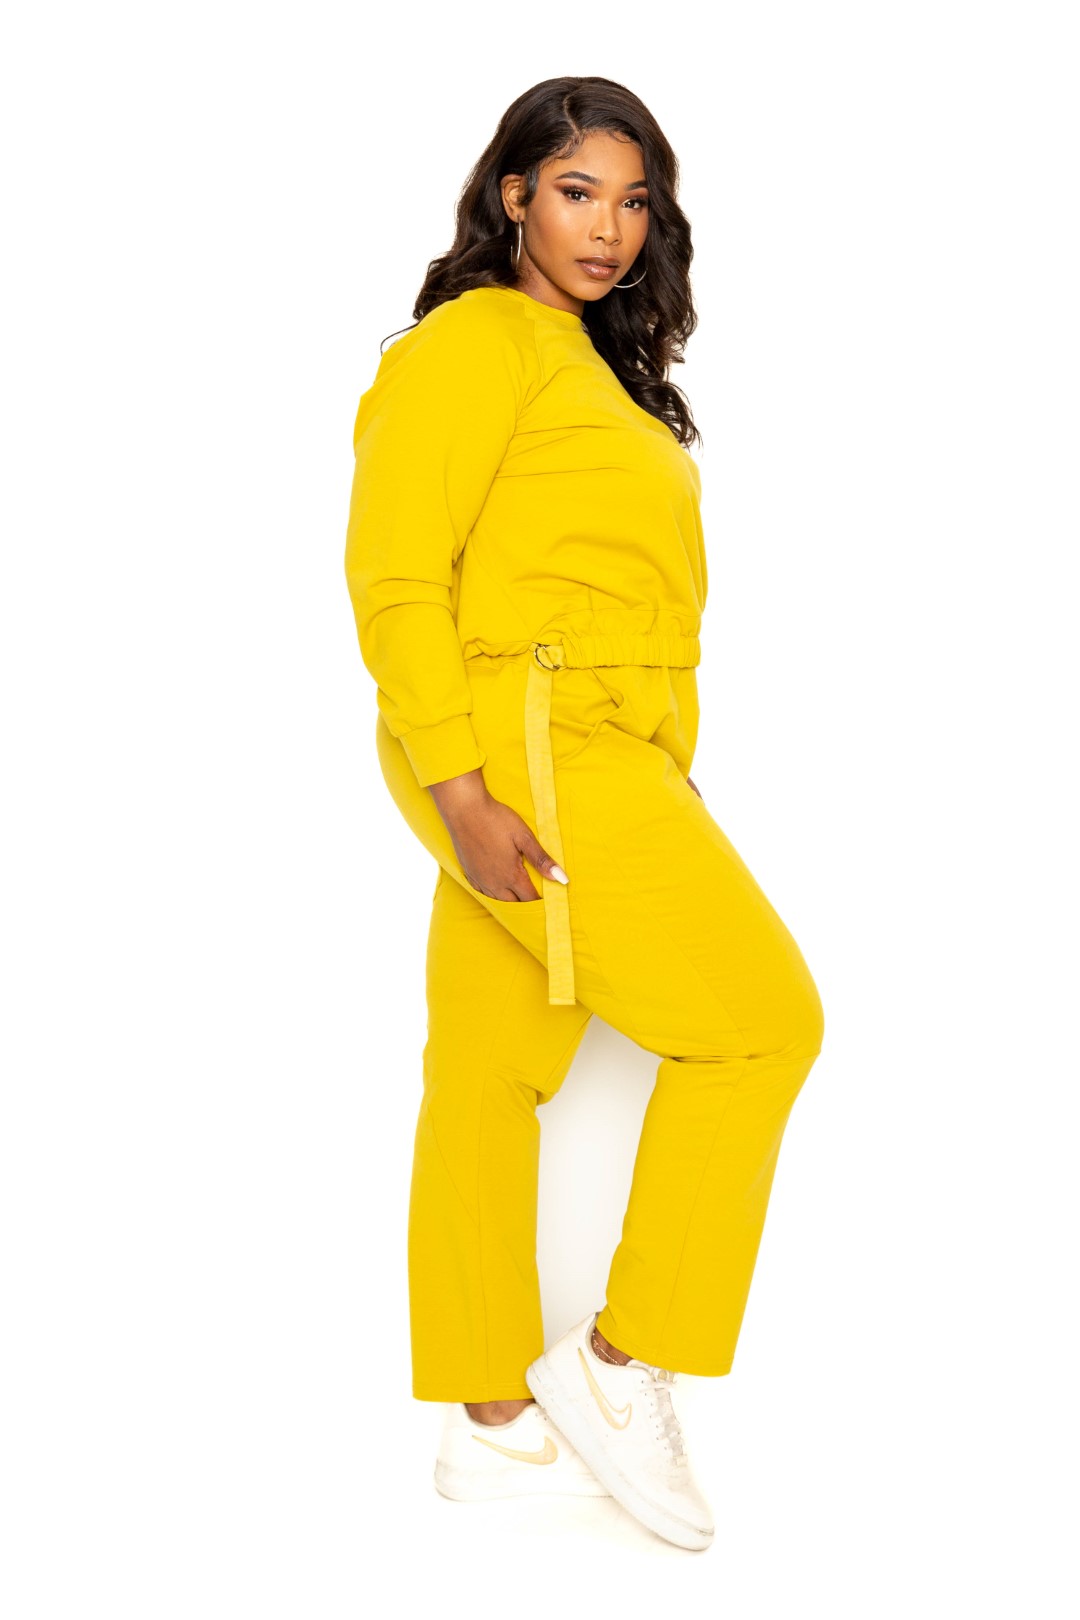 MUSTARD - Grommet Detail Lounge Sets Voluptuous (+) Plus Size -3 colors- Ships from The US - womens top & pants set at TFC&H Co.